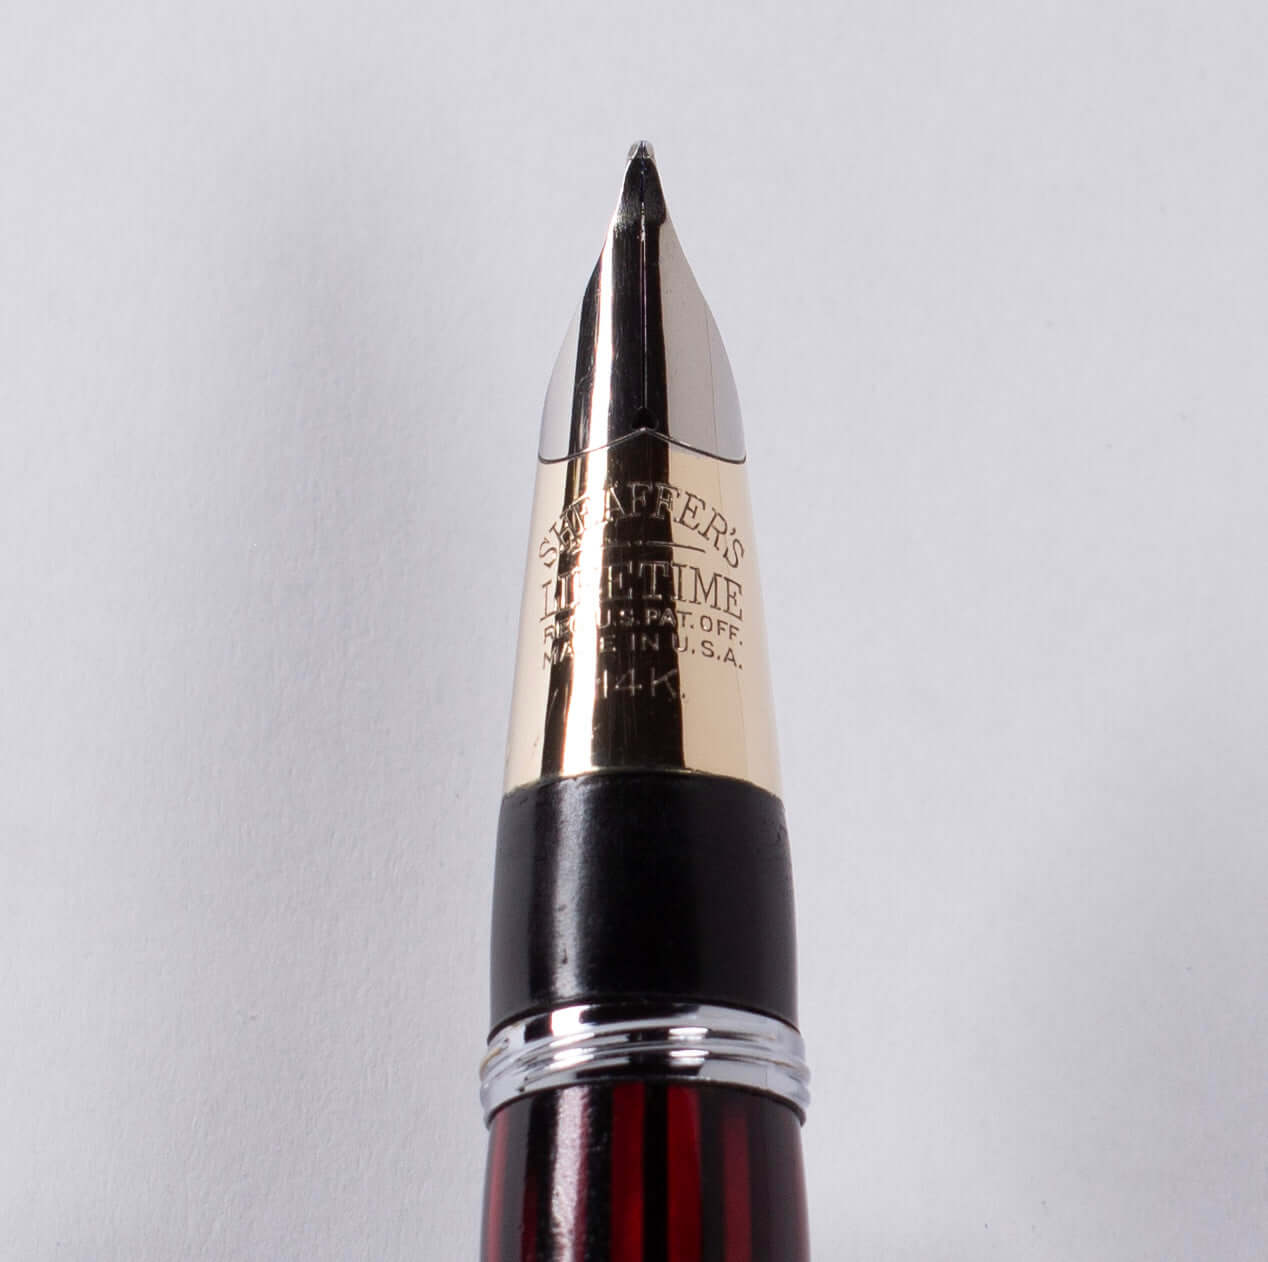 ${titleType: Vintage Vac-Fil Fountain Pen Product name: Sheaffer Triumph Vacuum-Fil Manufacturer and Year: 1940's Length: 5 1/8 inch Filling System: Vacuum-Fil, Plunger, restored with new section and piston Color/Pattern: Carmine Red Nib Type/Condition an